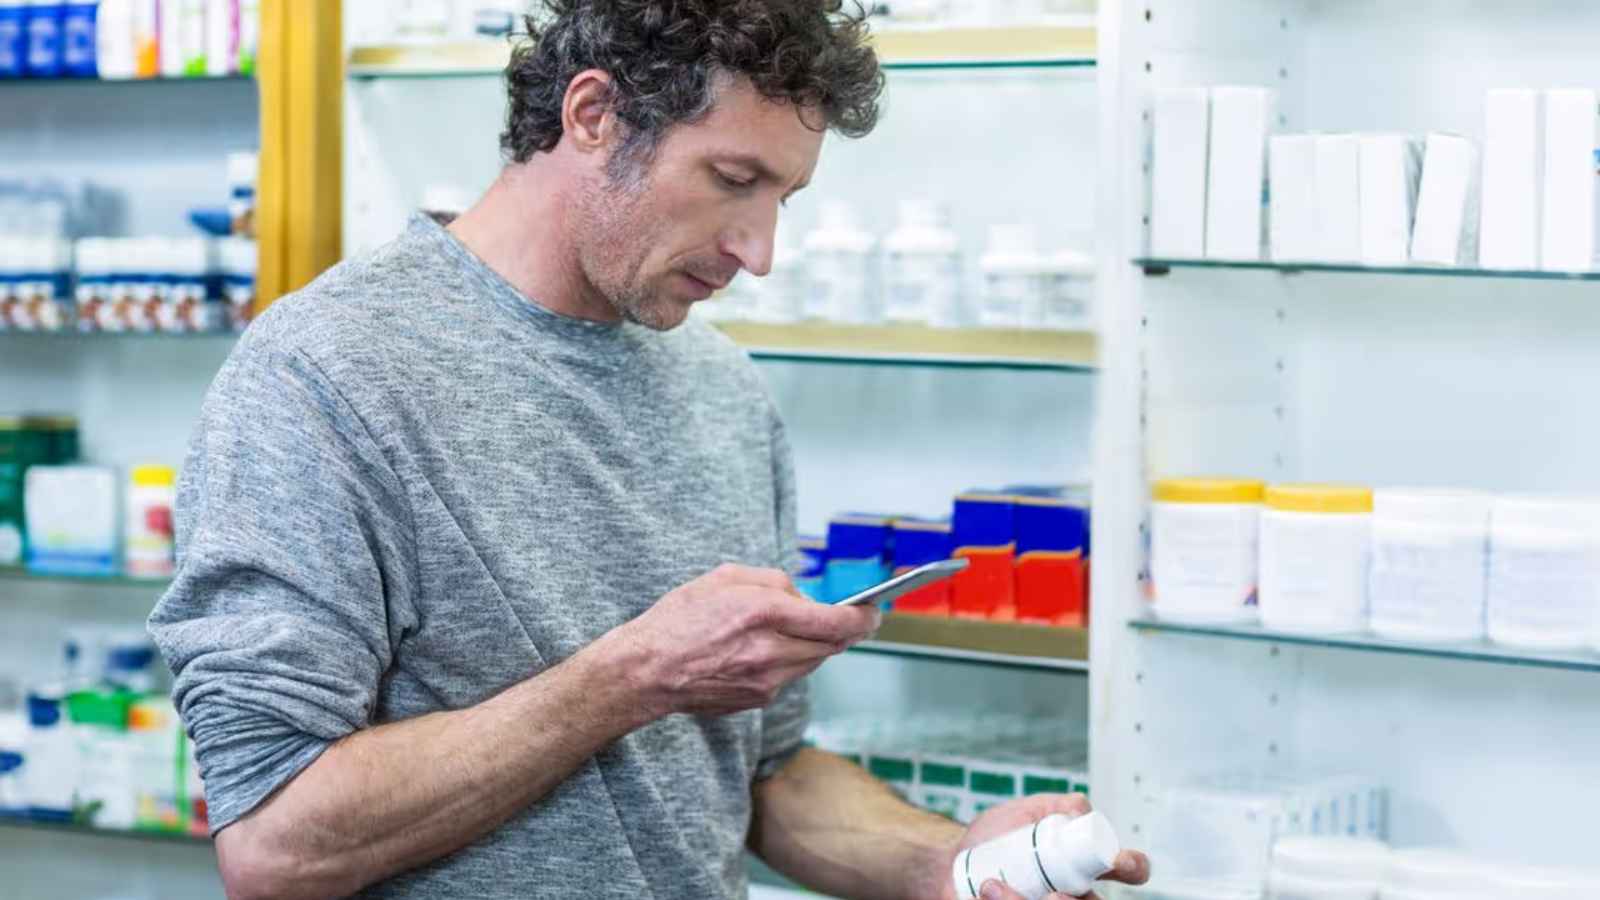 <p>You may have a valid prescription for those anti-anxiety meds or allergy pills. However, in Japan, possession of certain medications can still get you arrested. Make sure to check the <a href="https://frenzhub.com/laws-and-rules-about-food-in-other-countries/" rel="noreferrer noopener">country’s laws and regulations</a> on prescription drugs before traveling with them. Better yet, consult your doctor and see if they have alternative travel recommendations.</p>